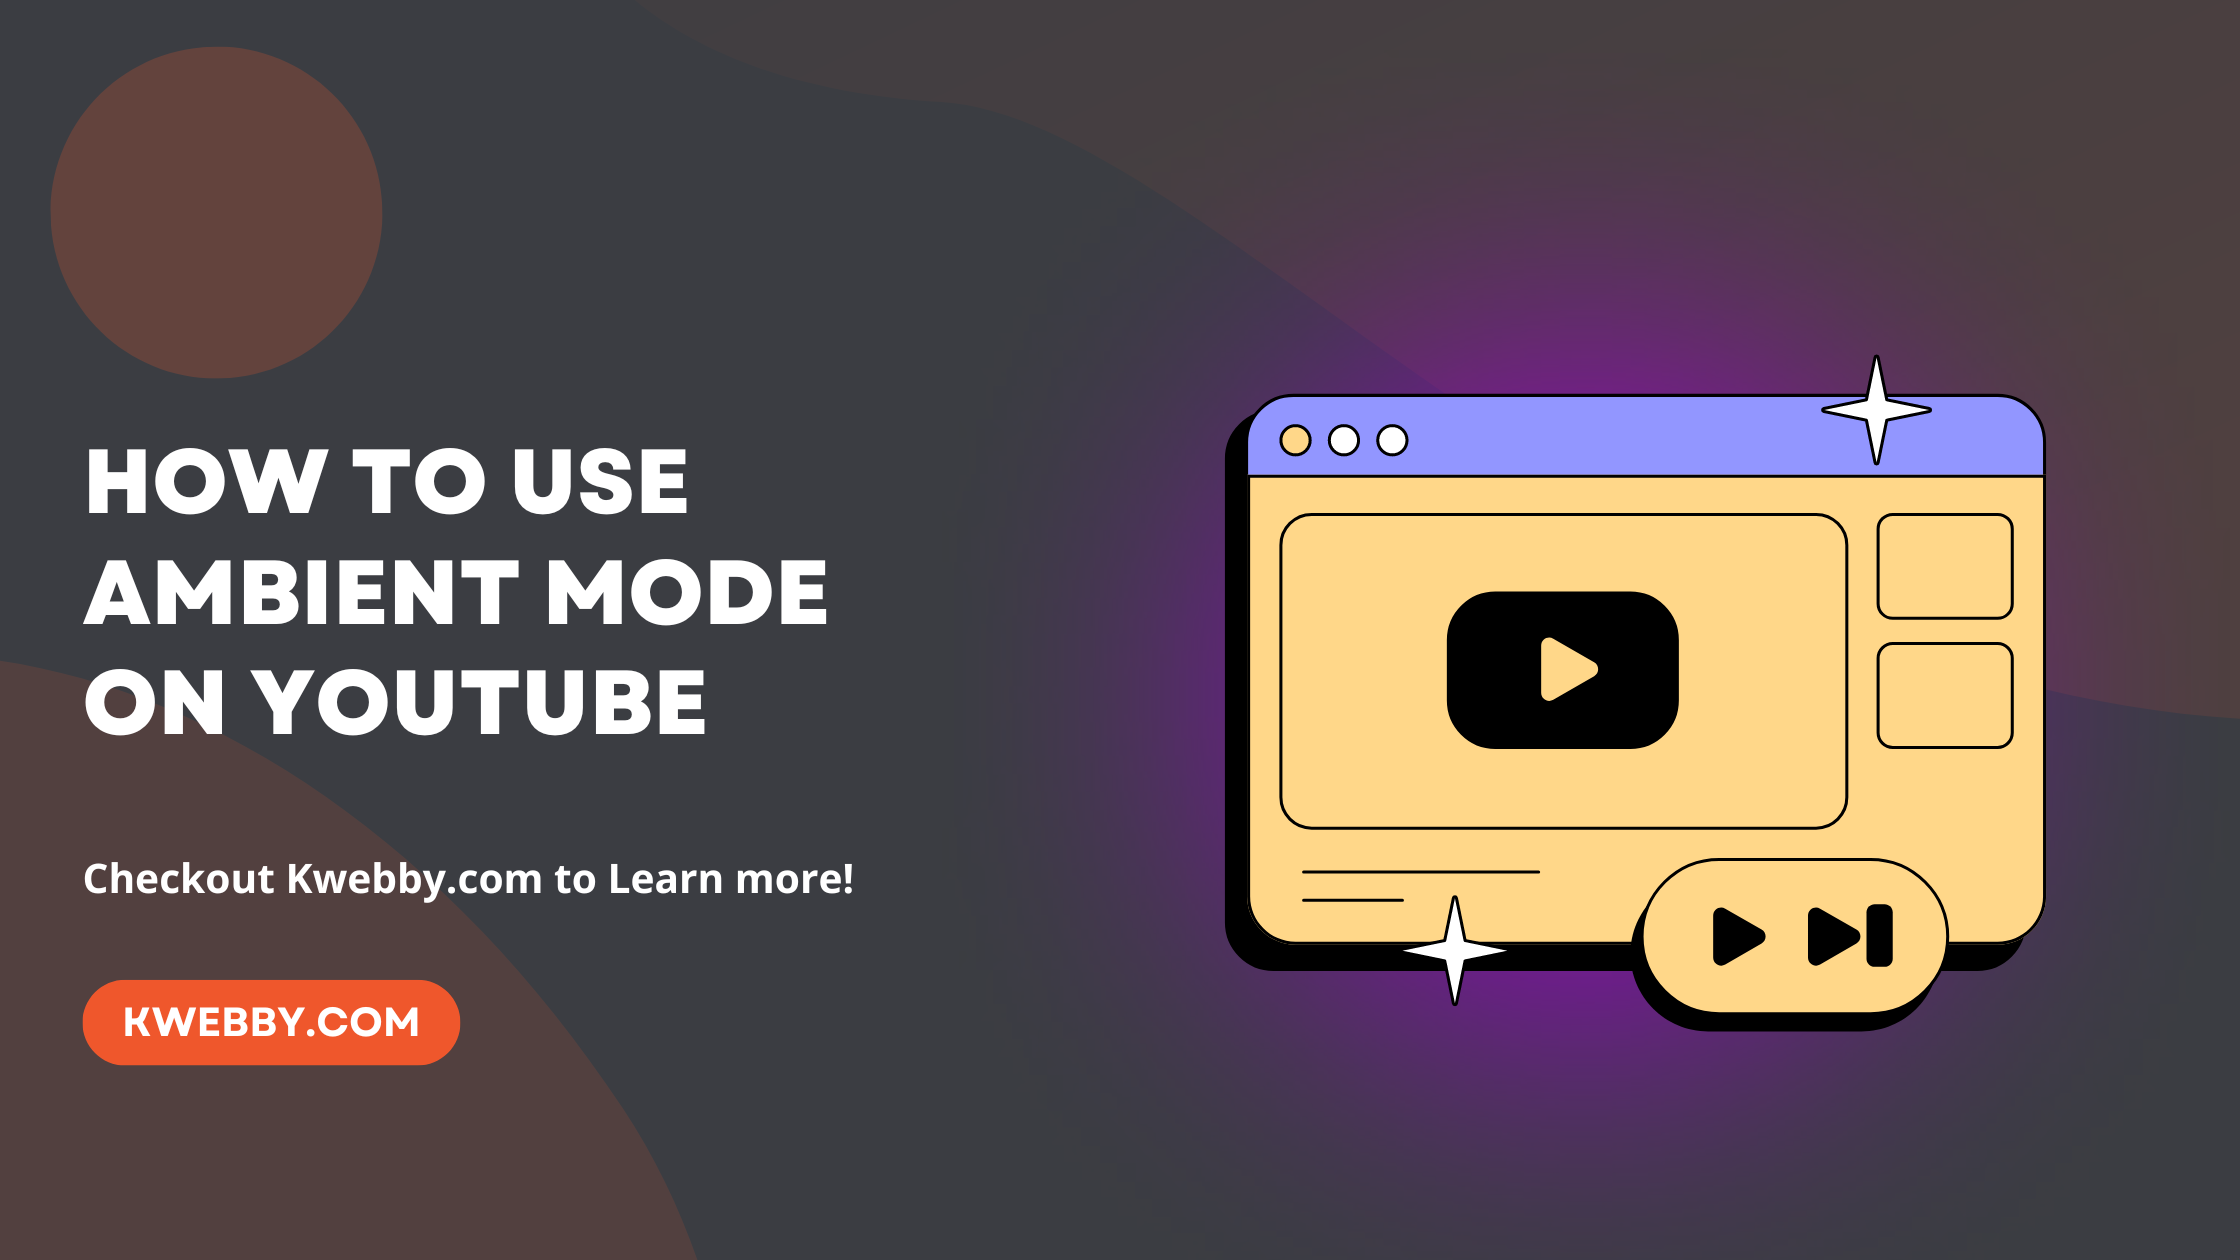 How to use ambient mode on YouTube in 2 Easy Steps